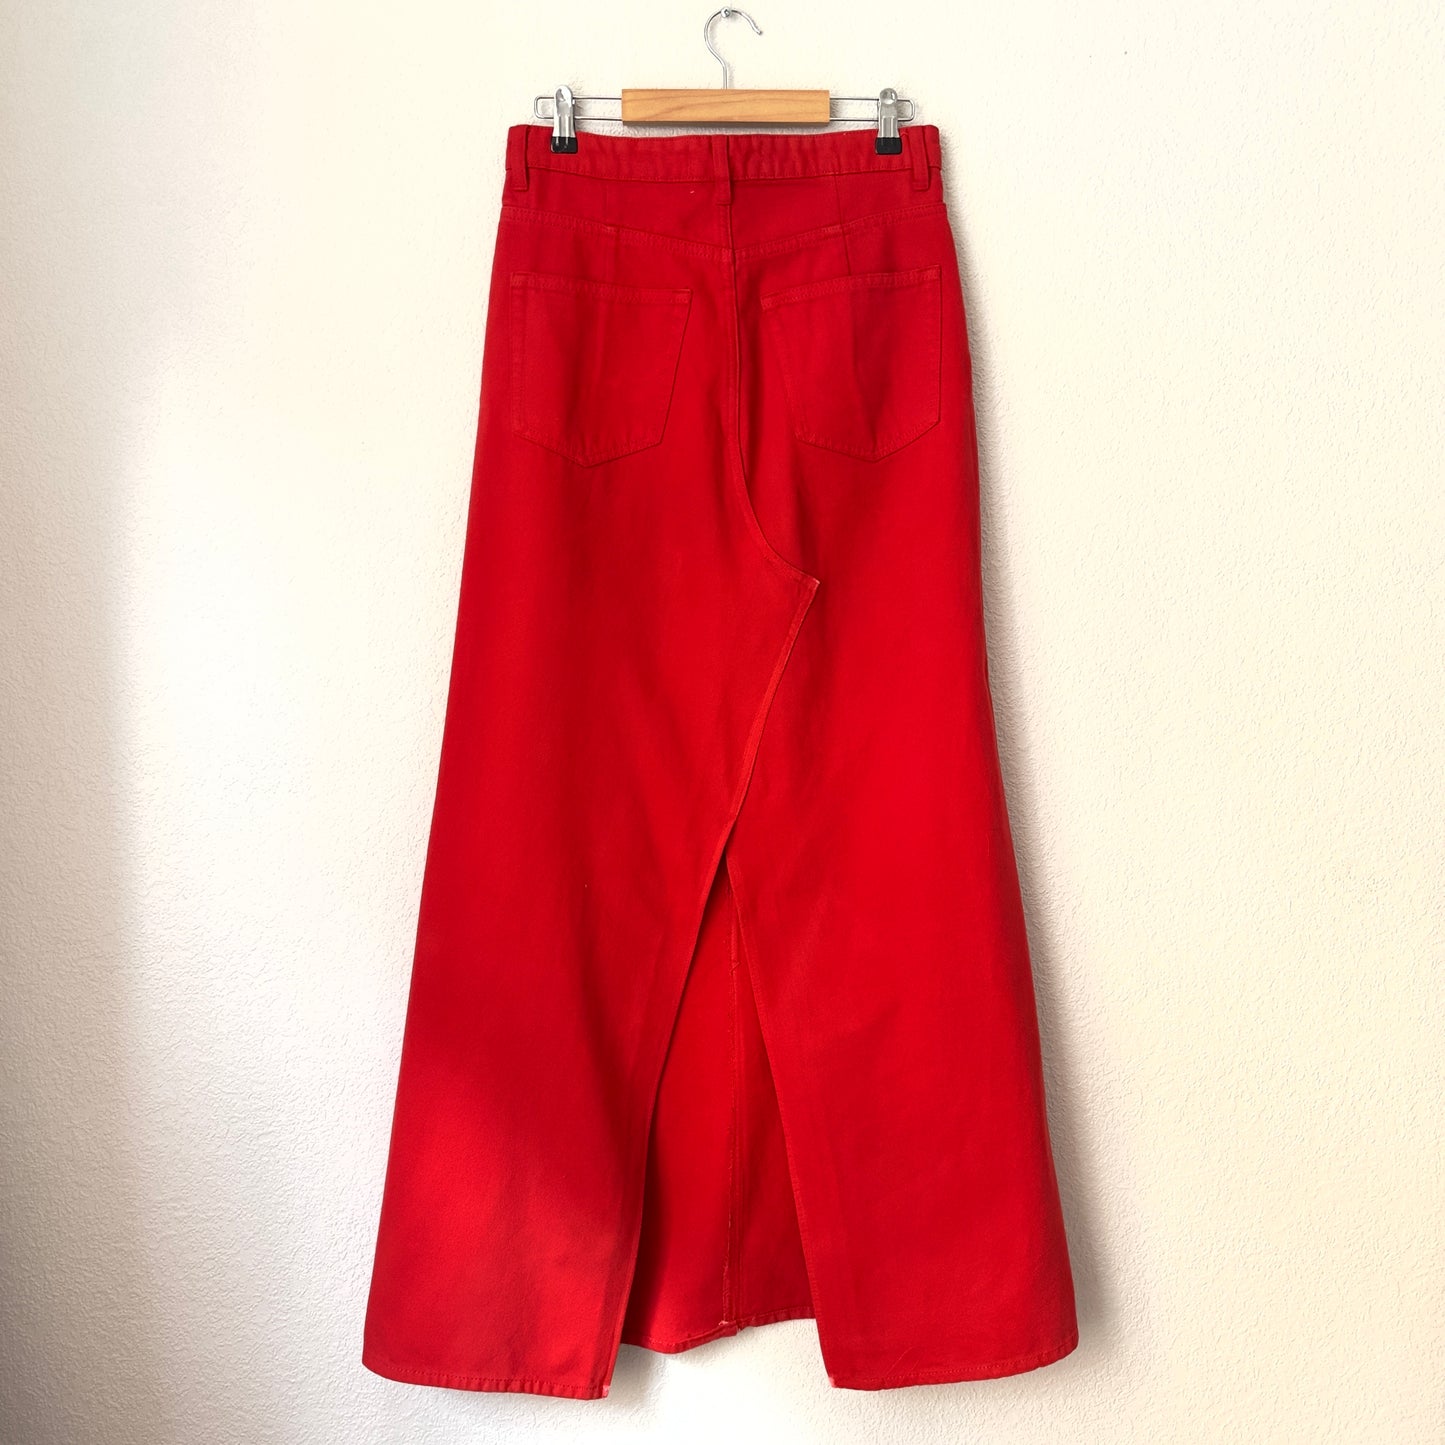 Upcycled Denim Maxi Skirt 22 - Red - Size M